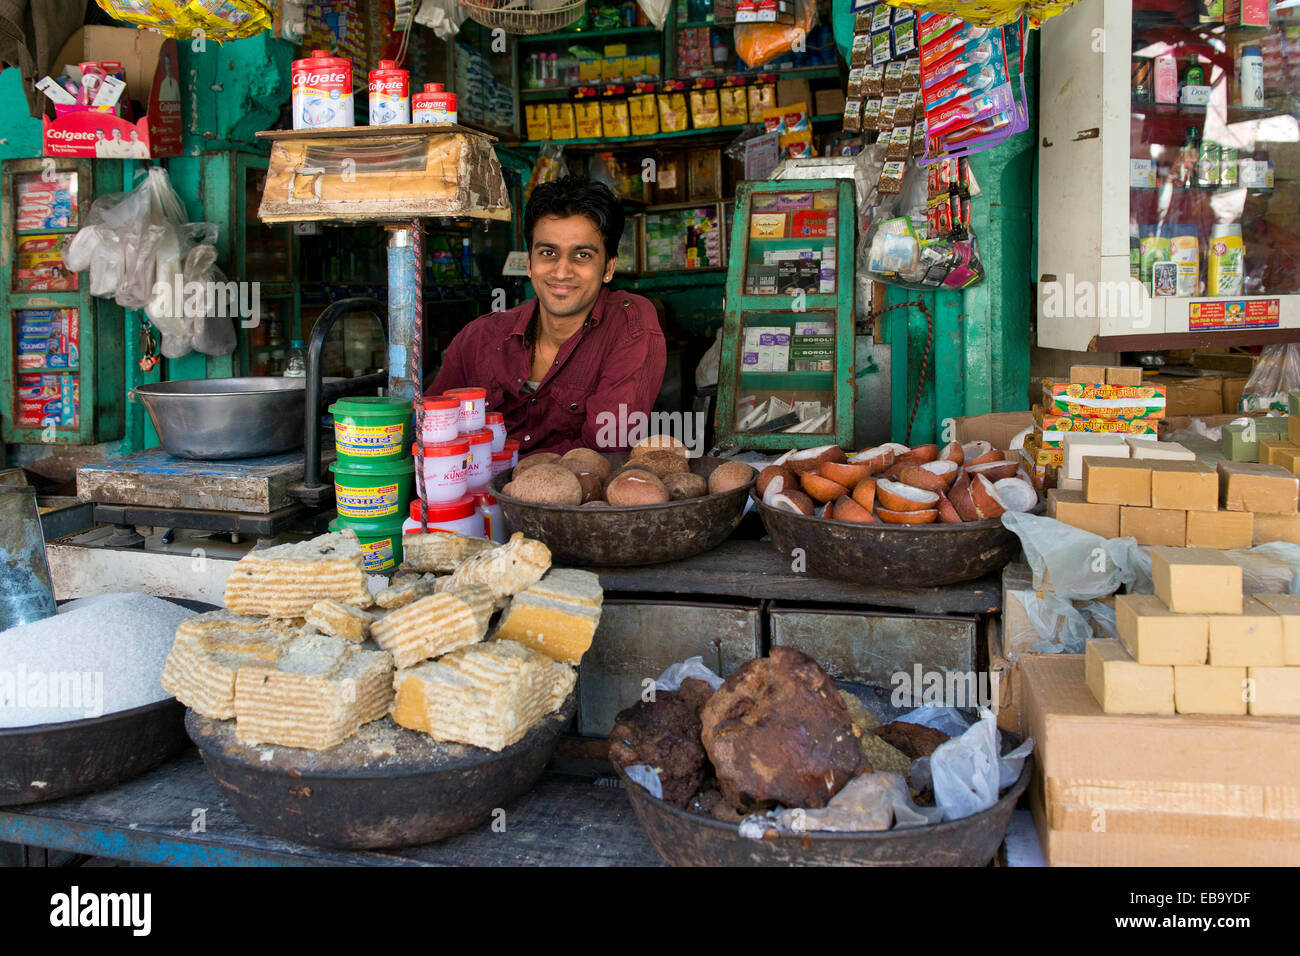 Friendly-looking grocer at the market, Jodhpur, Rajasthan, India Stock Photo